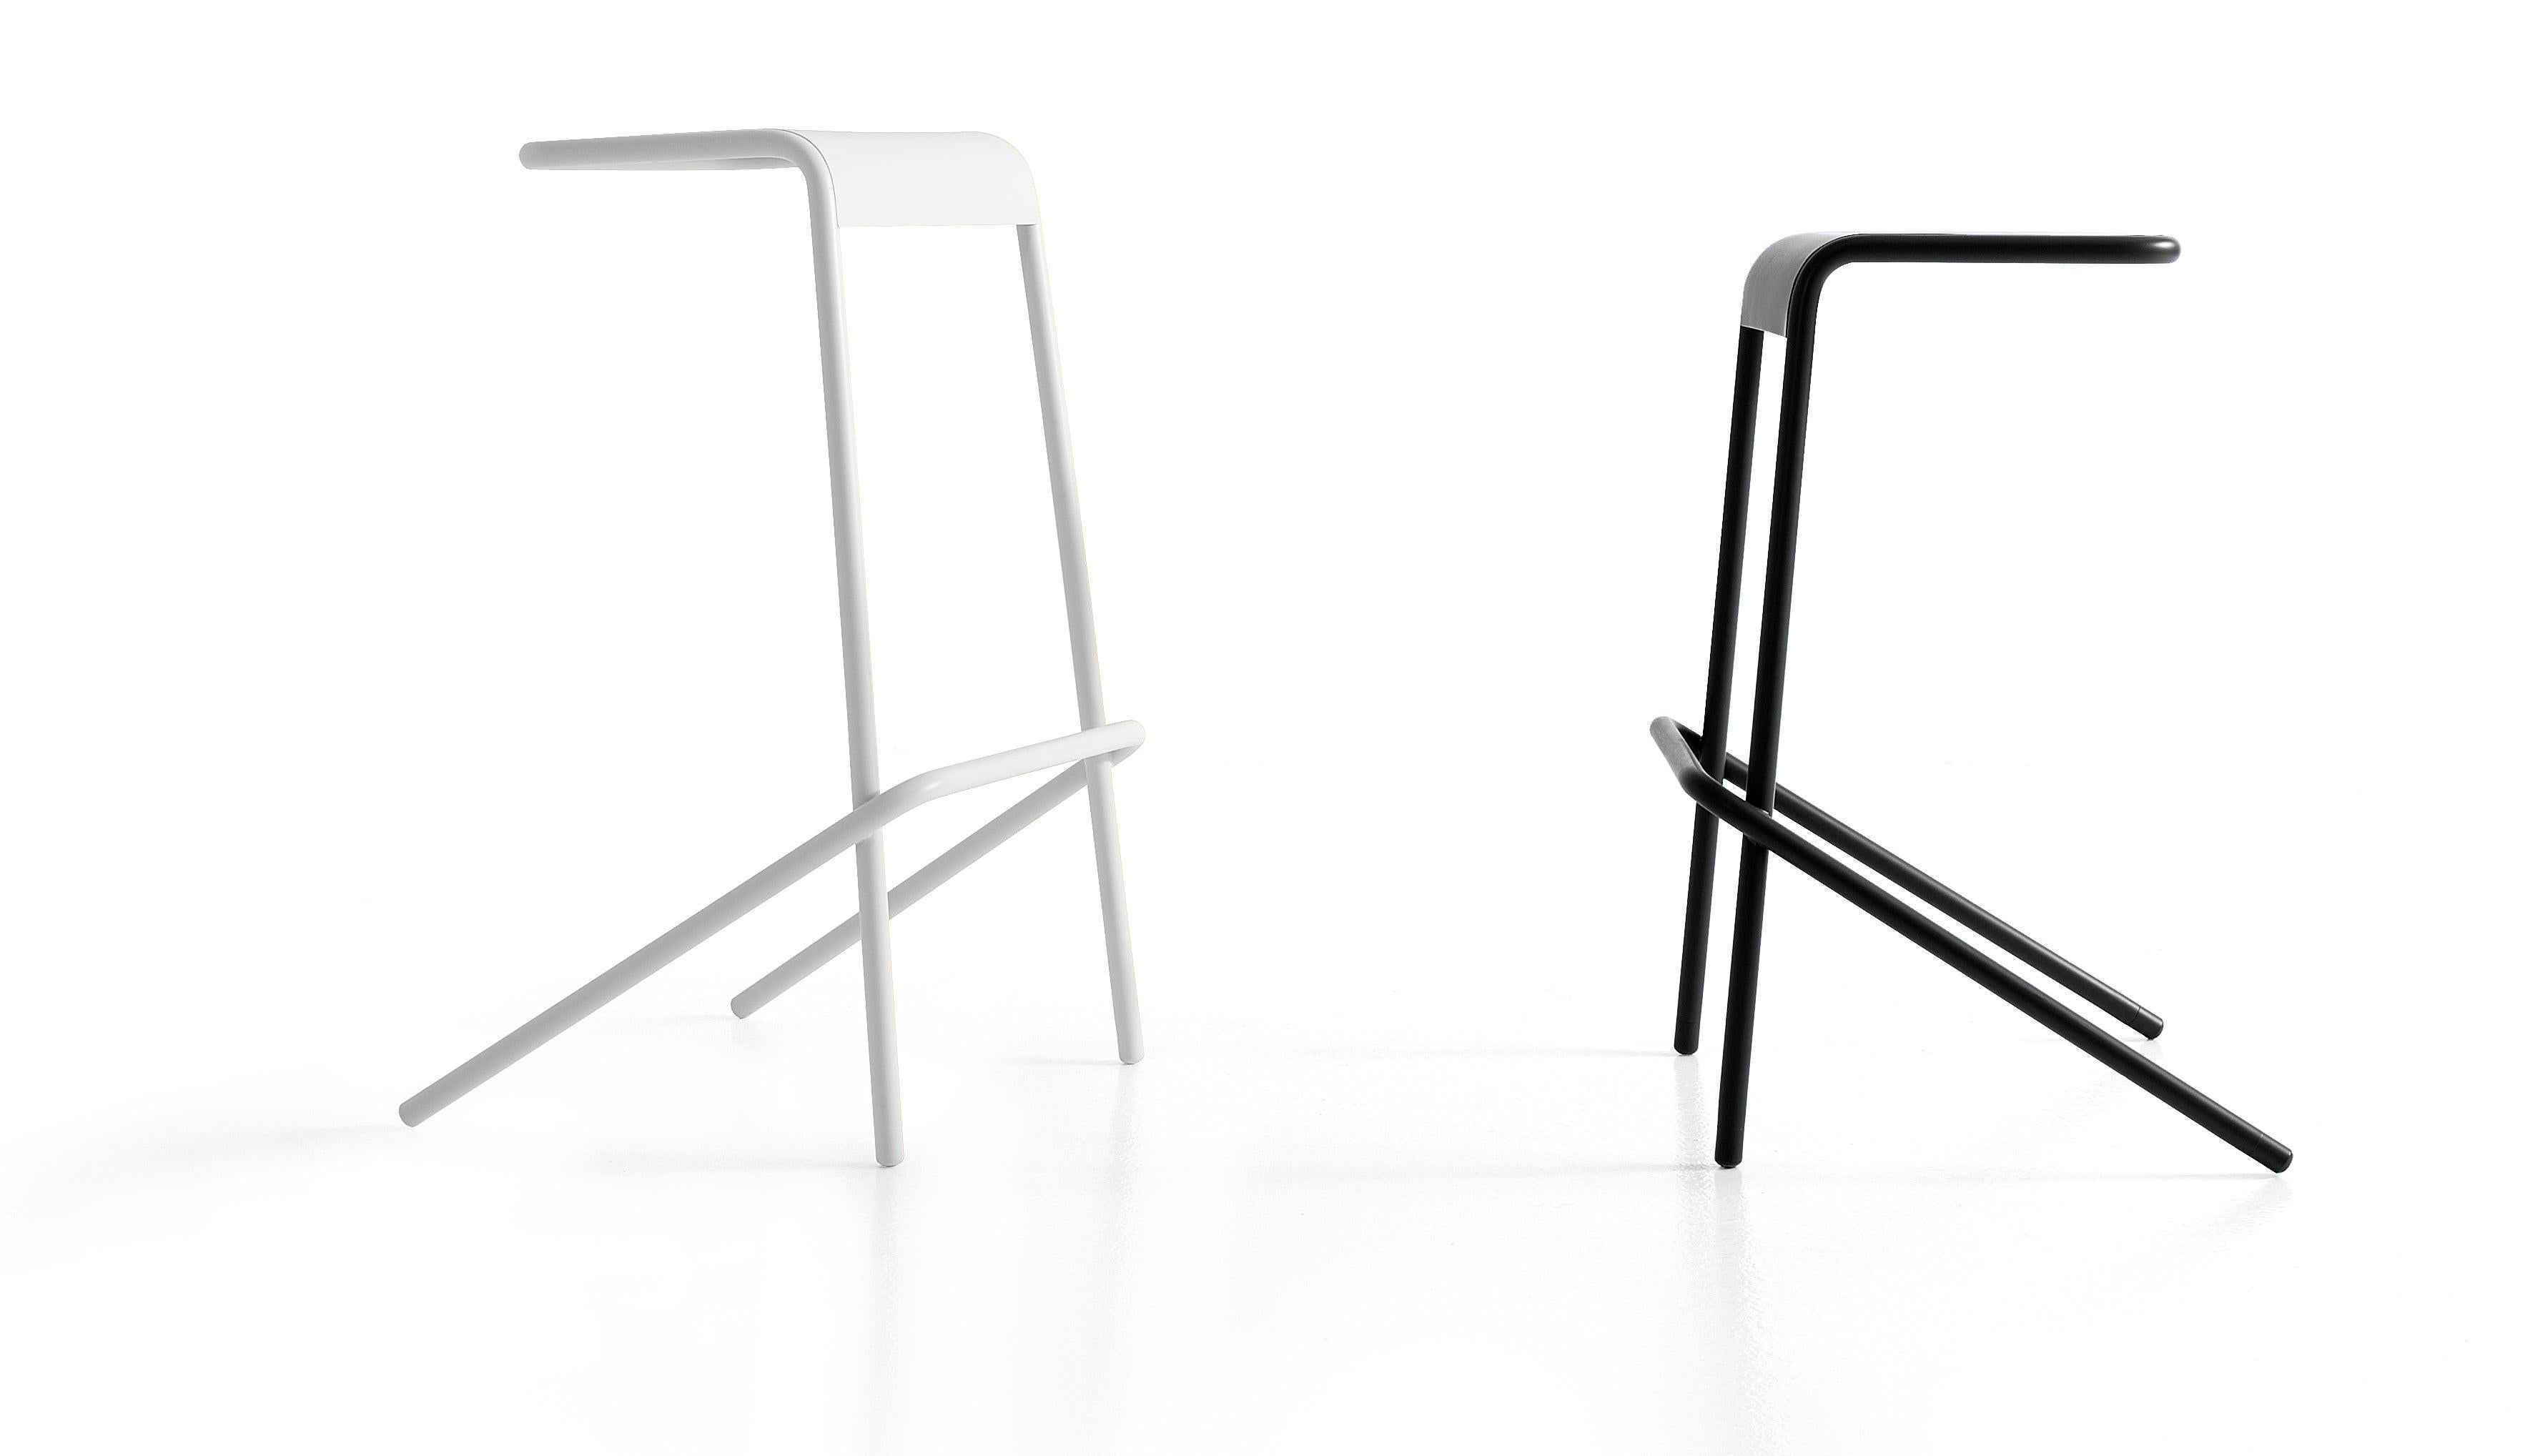 Designed by Todd Bracher, the Alodia stool is stackable and made of tubular metal, with a laser-cut sheet metal seat and feet in black plastic. Alodia is available in two heights, and comes Mattee varnished in white, mud and